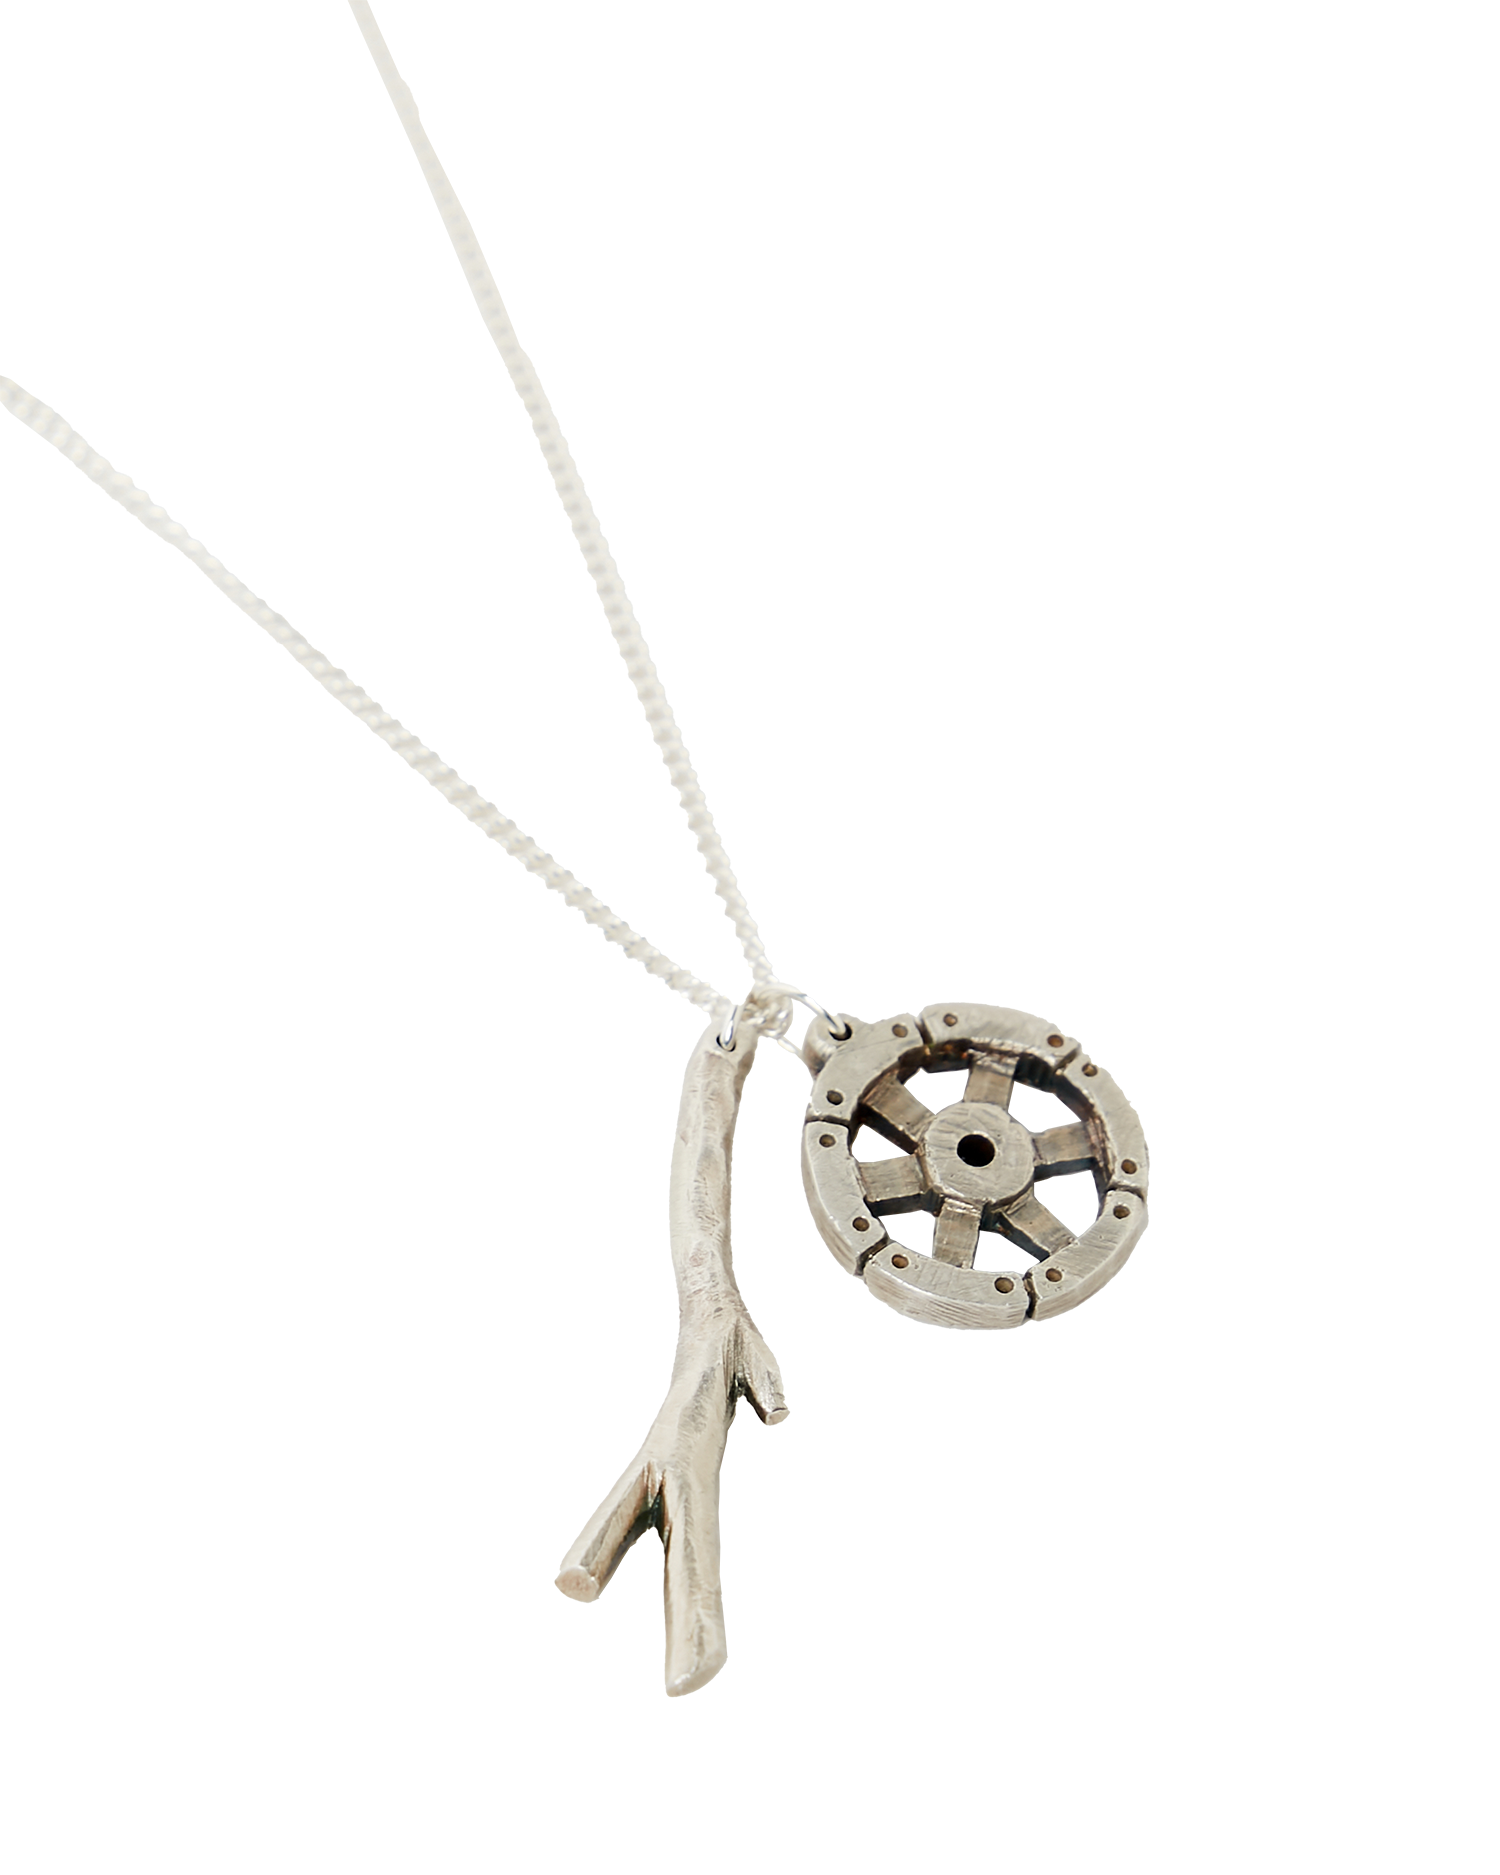 Stick In The Wheel Chain - Oxidised Silver